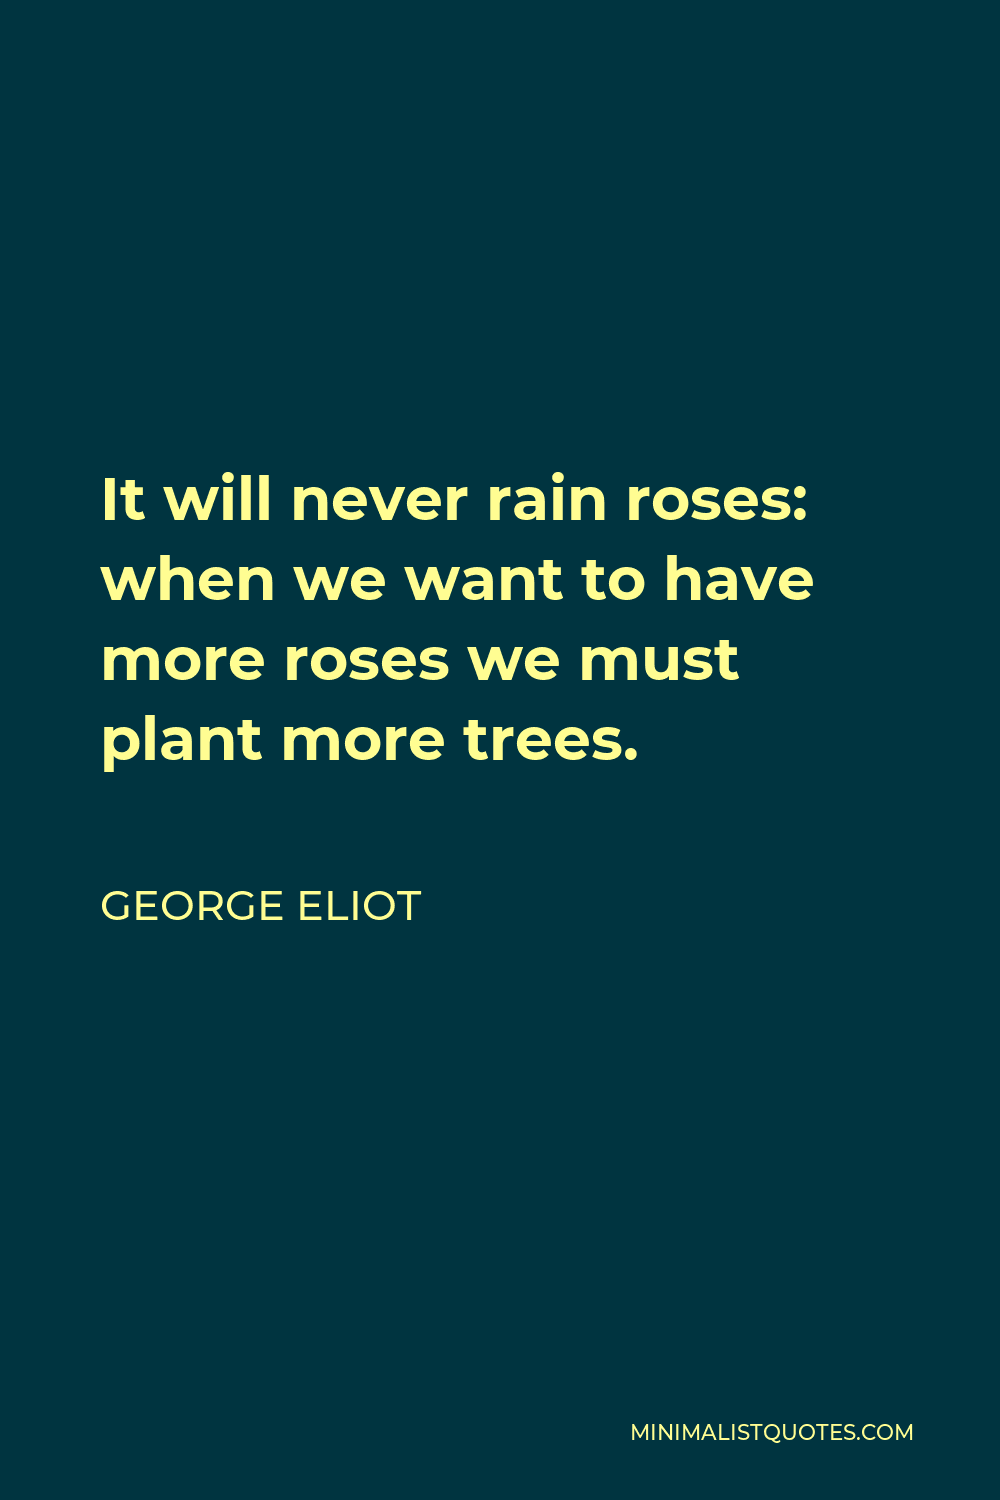 George Eliot Quote - It will never rain roses: when we want to have more roses we must plant more trees.